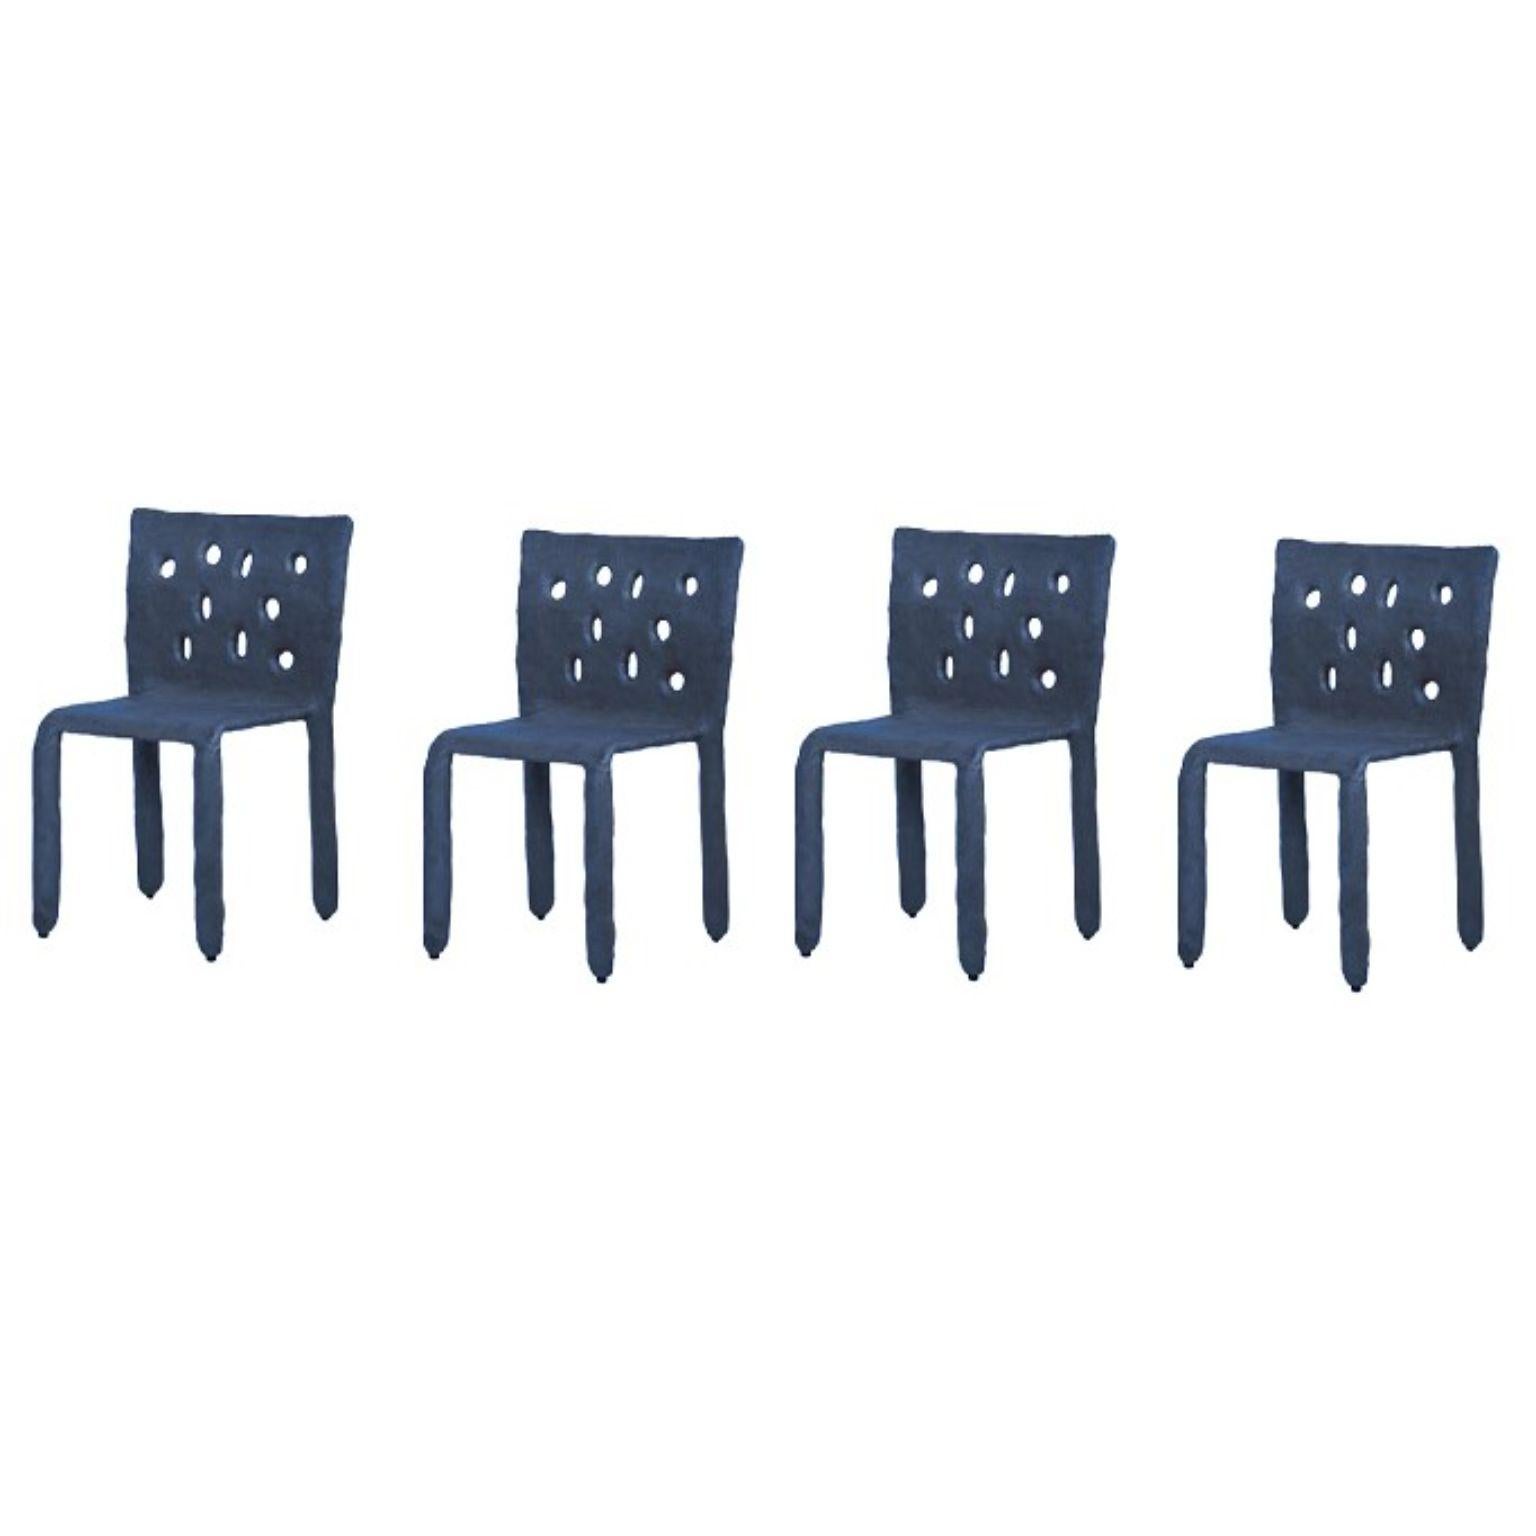 Set of 4 Blue Sculpted Contemporary chairs by FAINA
Design: Victoriya Yakusha
Material: steel, flax rubber, biopolymer, cellulose
Dimensions: height 82 x width 54 x legs depth 45 cm
 Weight: 15 kilos.

Indoor finish available

Made in the